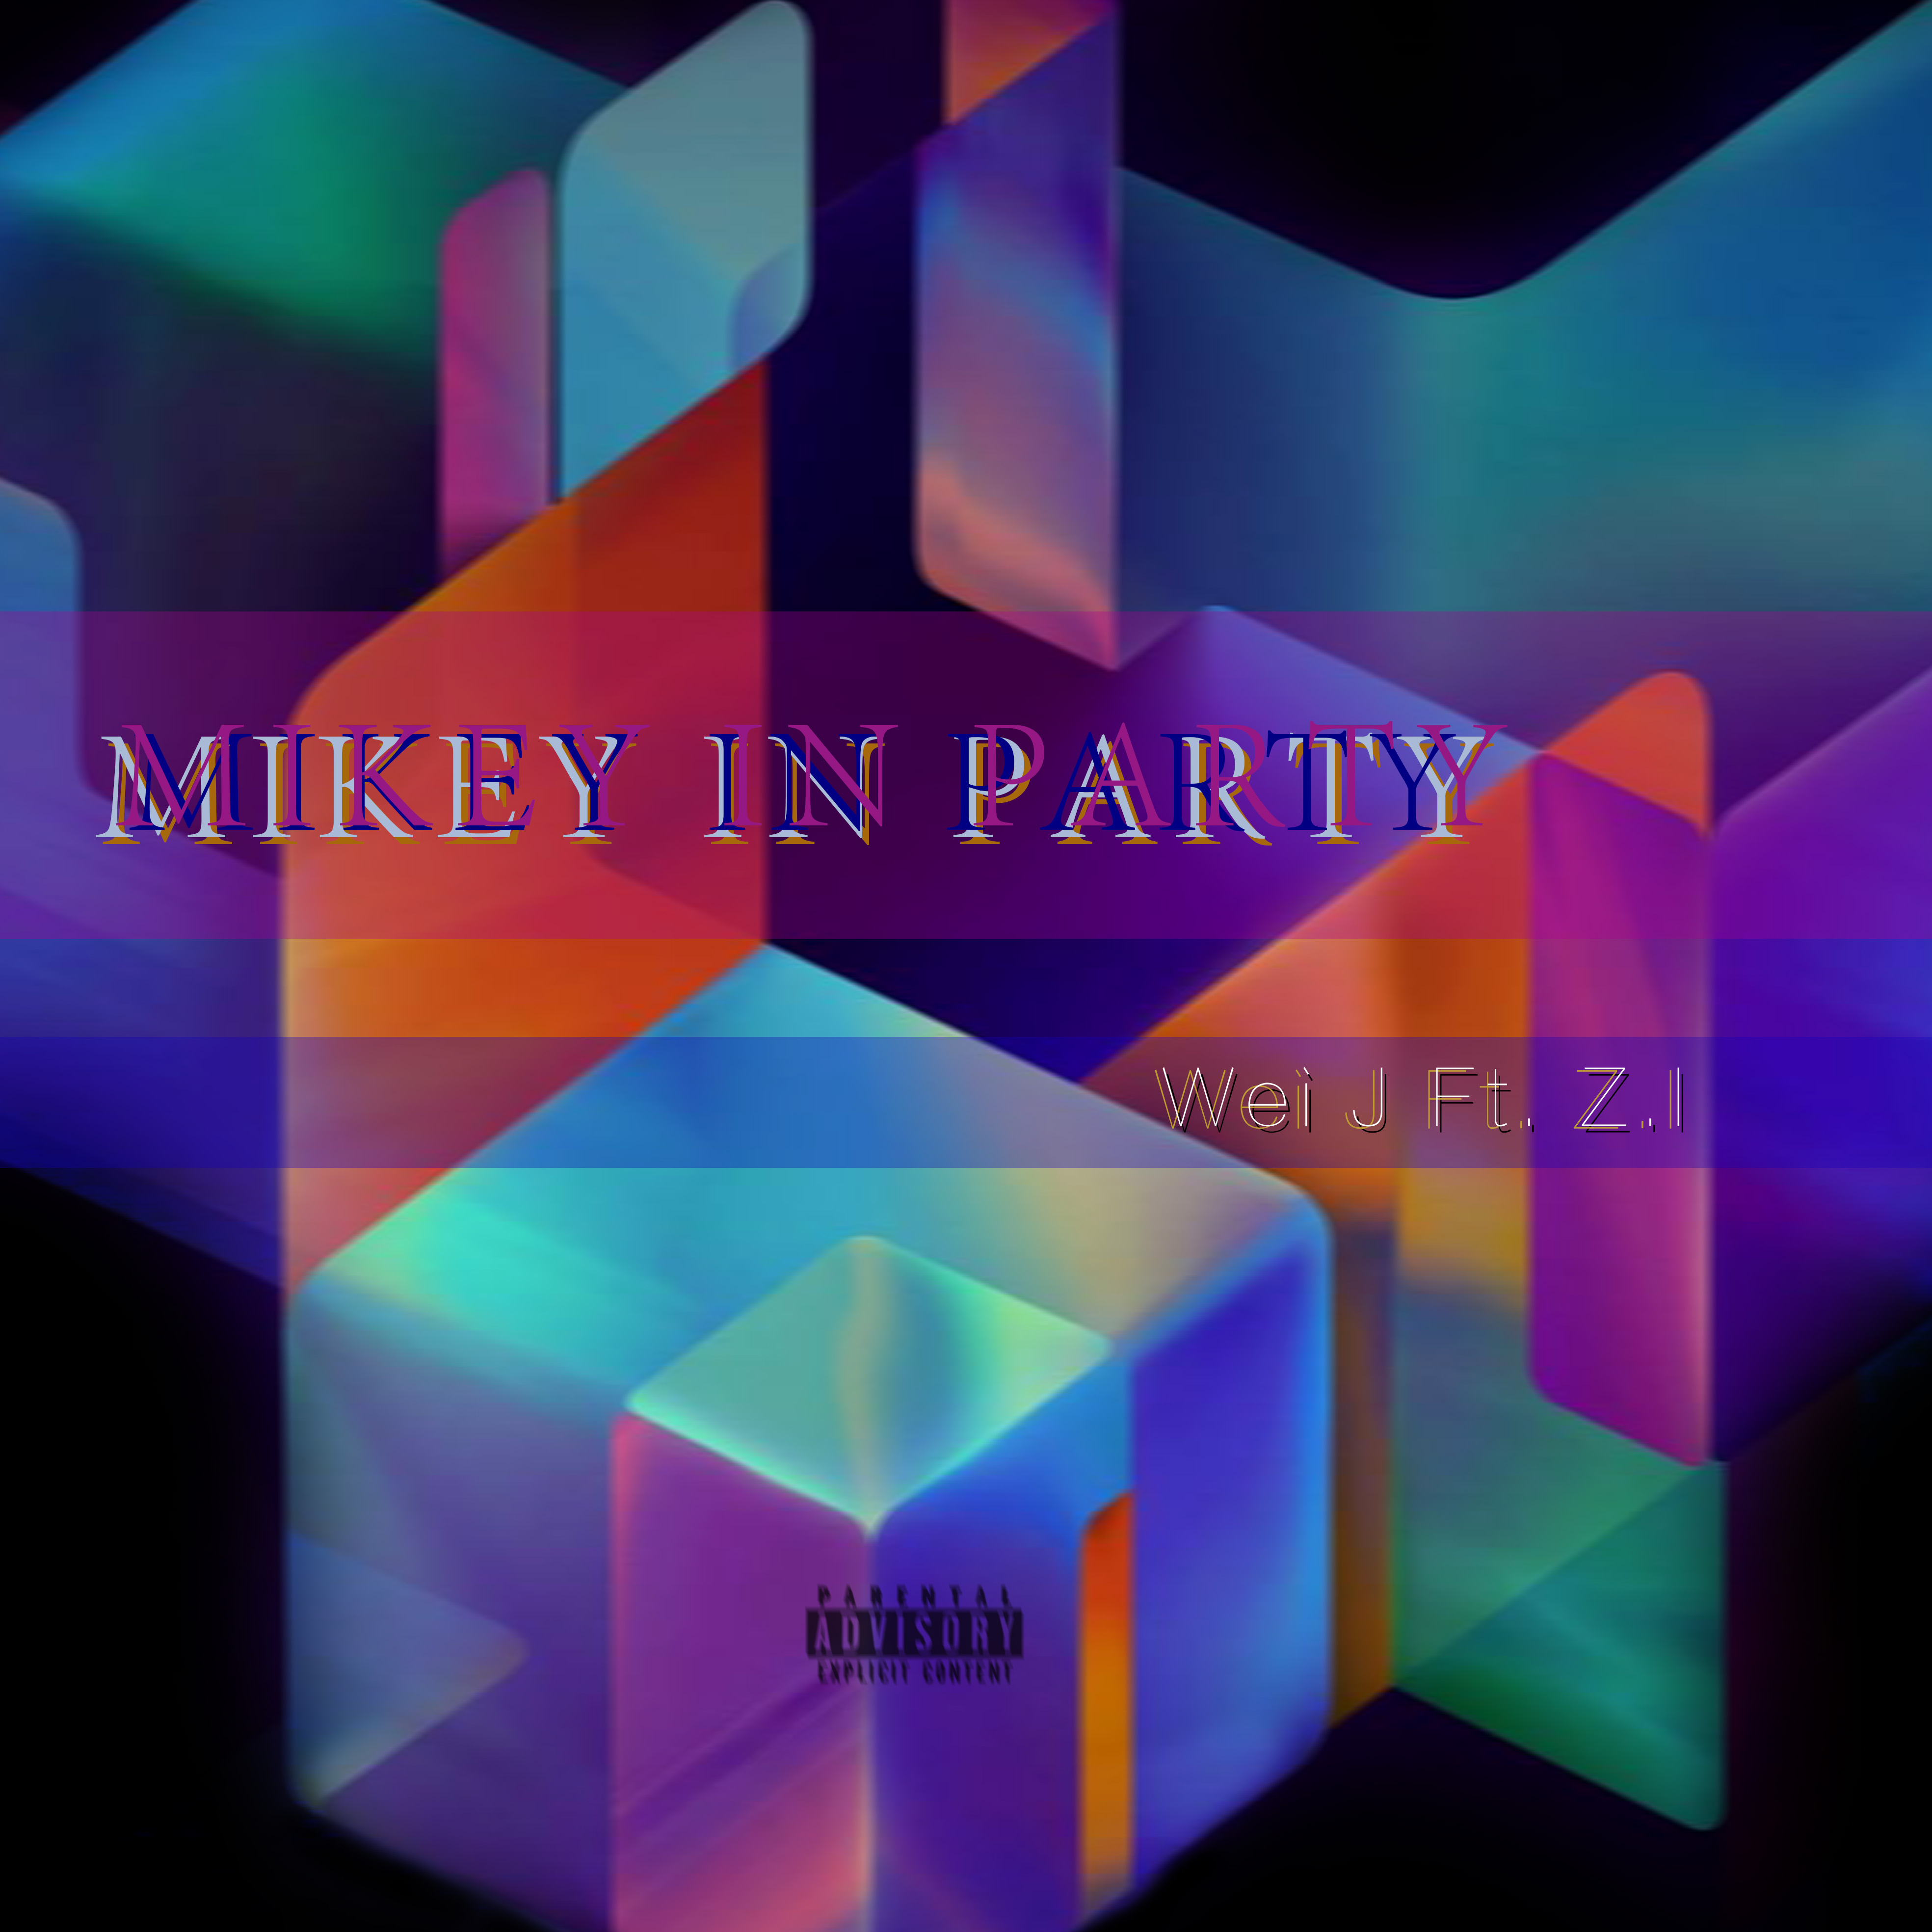 Mikey In Party